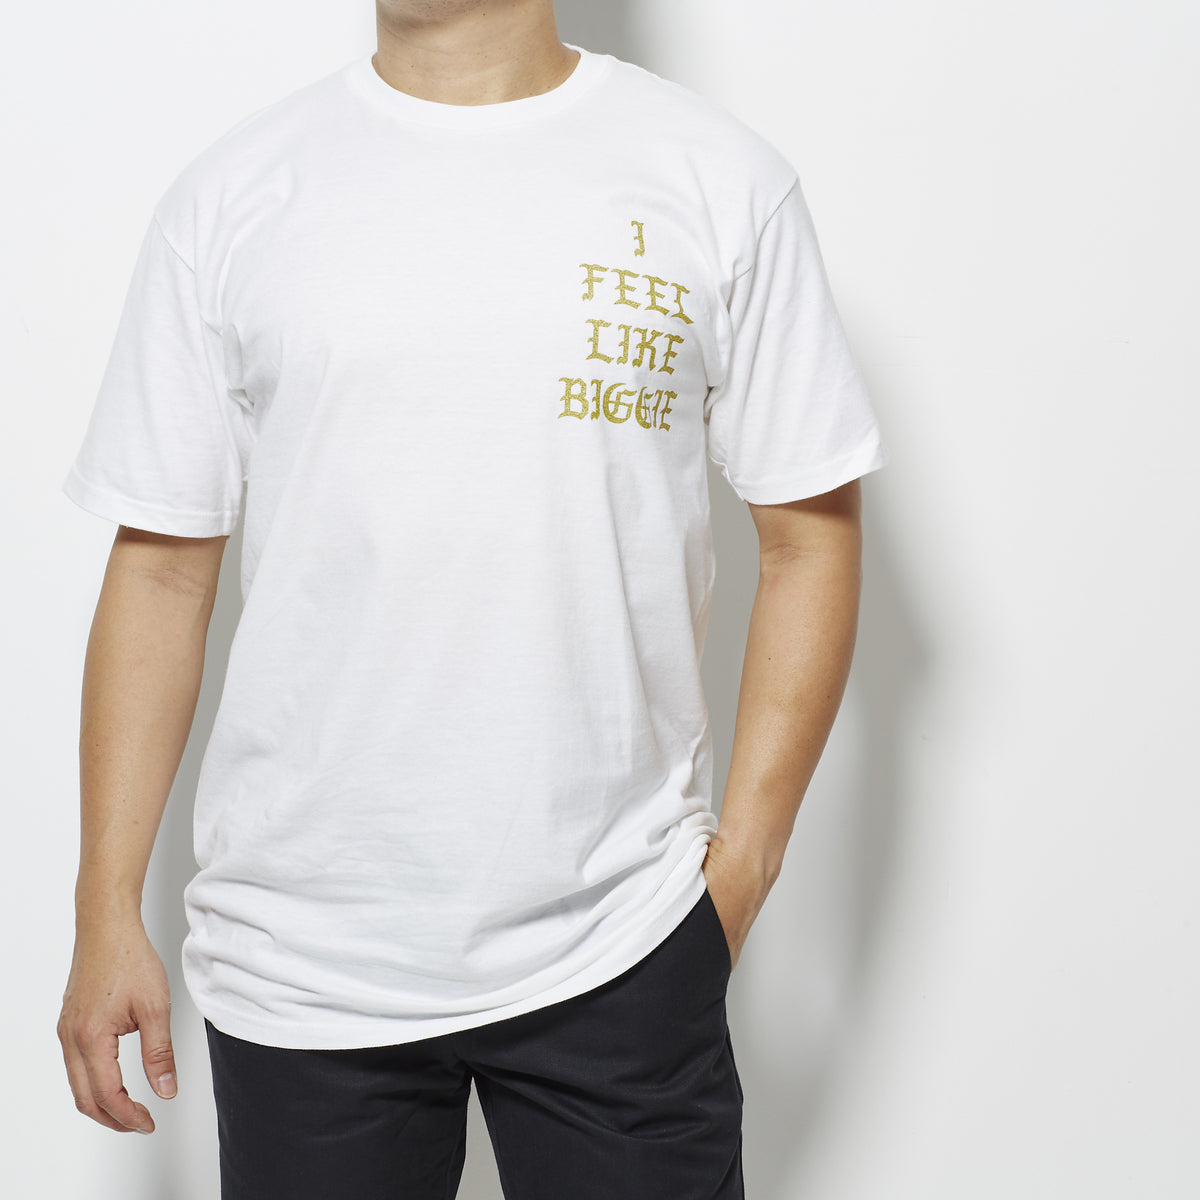 For The Homies Hypnotize (I Feel Like Biggie) Tee - White/Gold